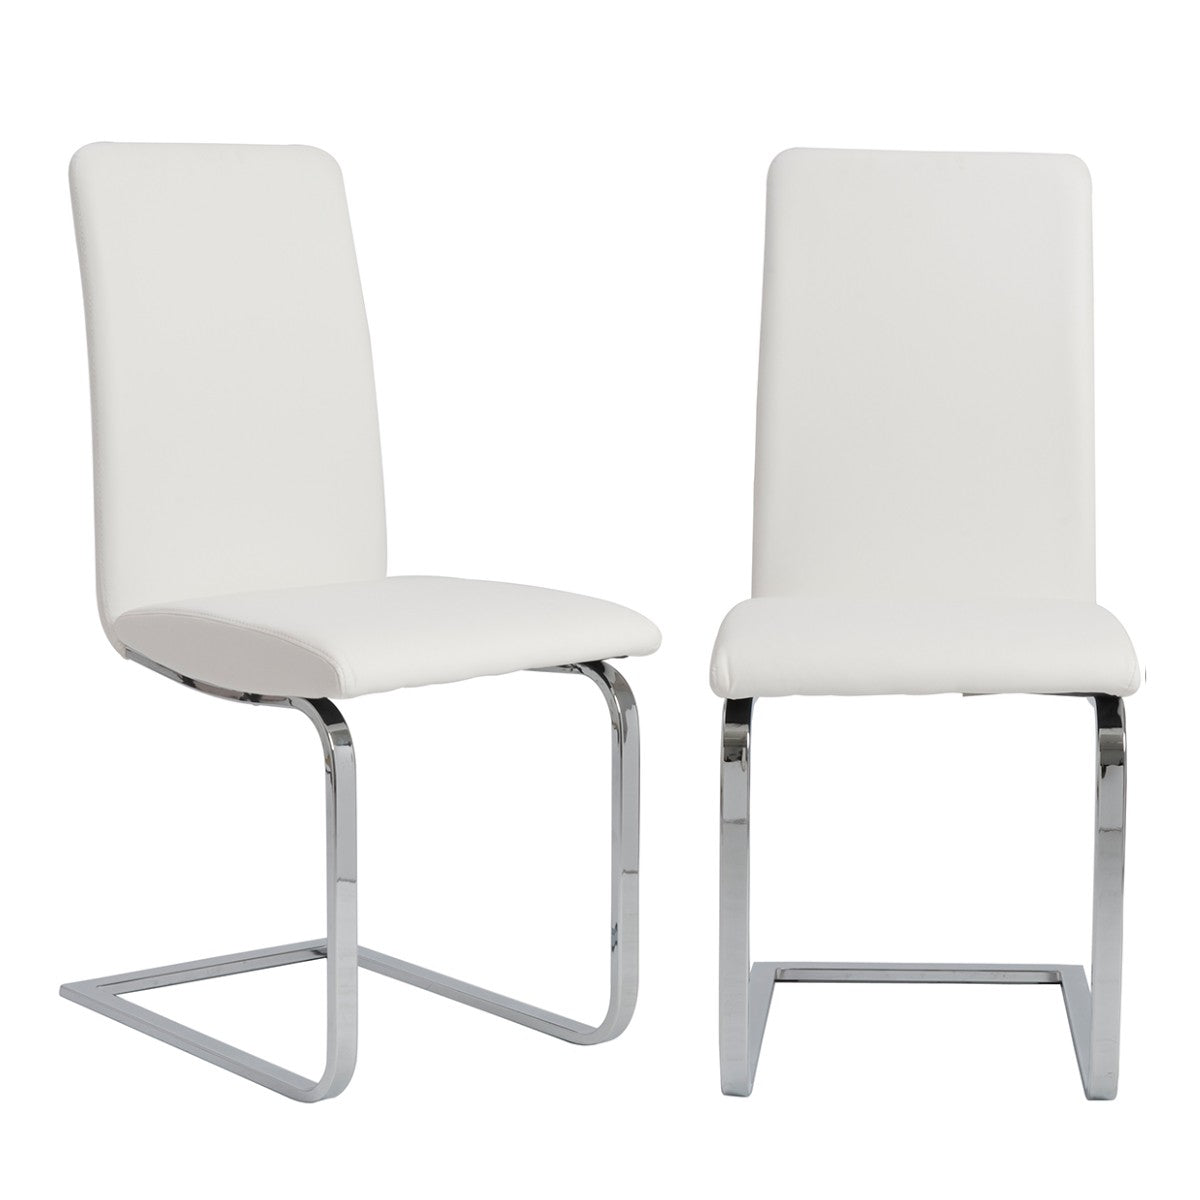 Set of Two Mod White and Silver Dining Chairs